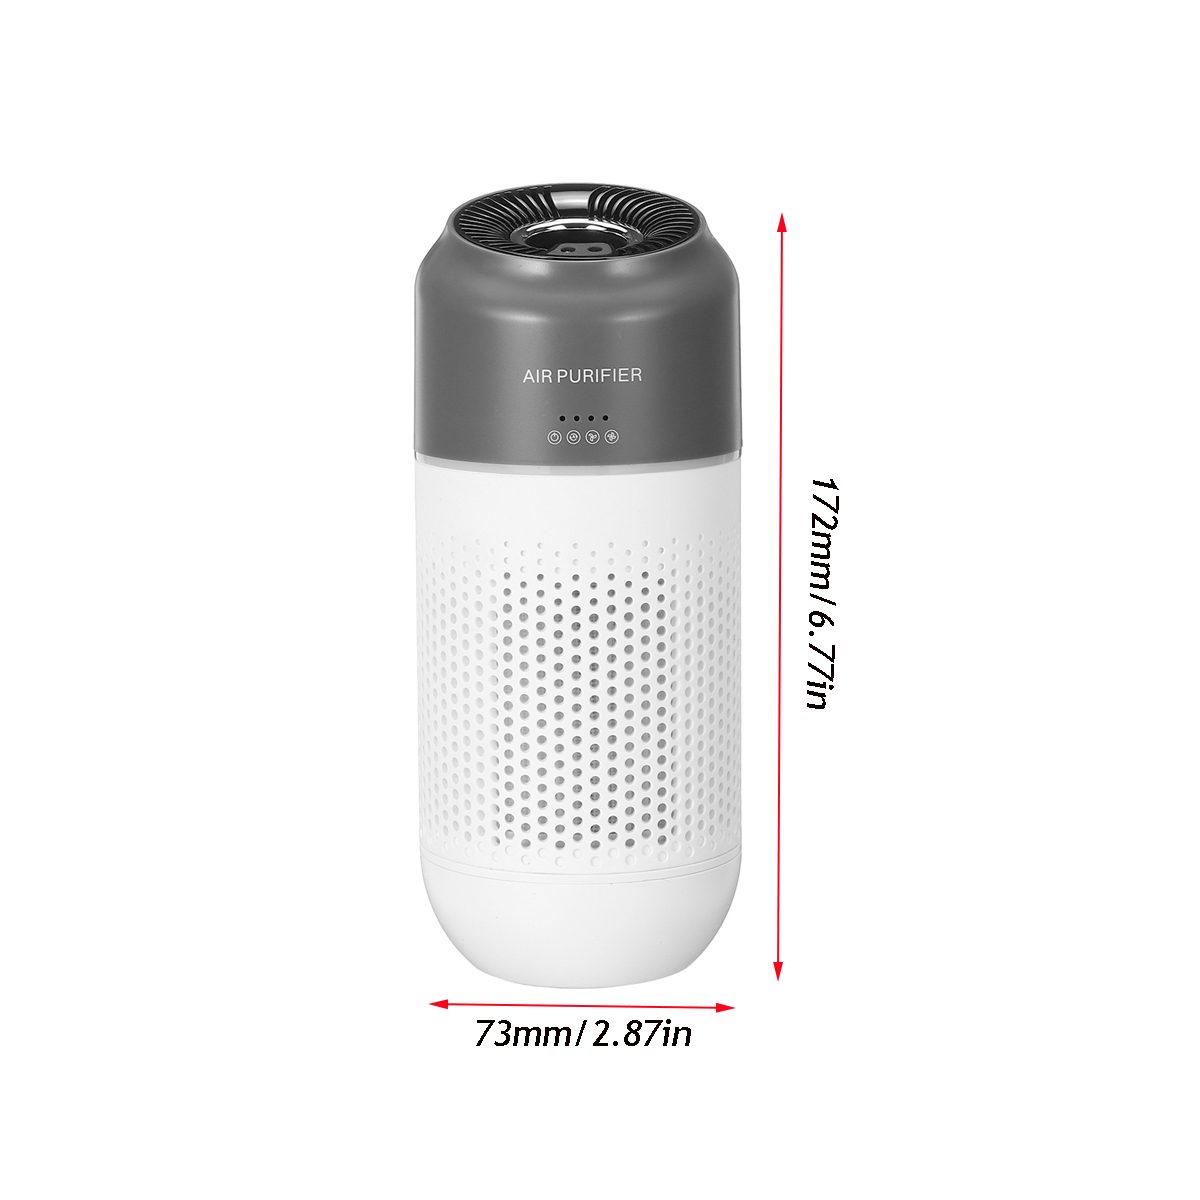 Mini-Air-Purifier-Double-layer-Filter-Purification-USB-Charging-Low-Noise-Removal-of-Formaldehyde-PM-1774239-12